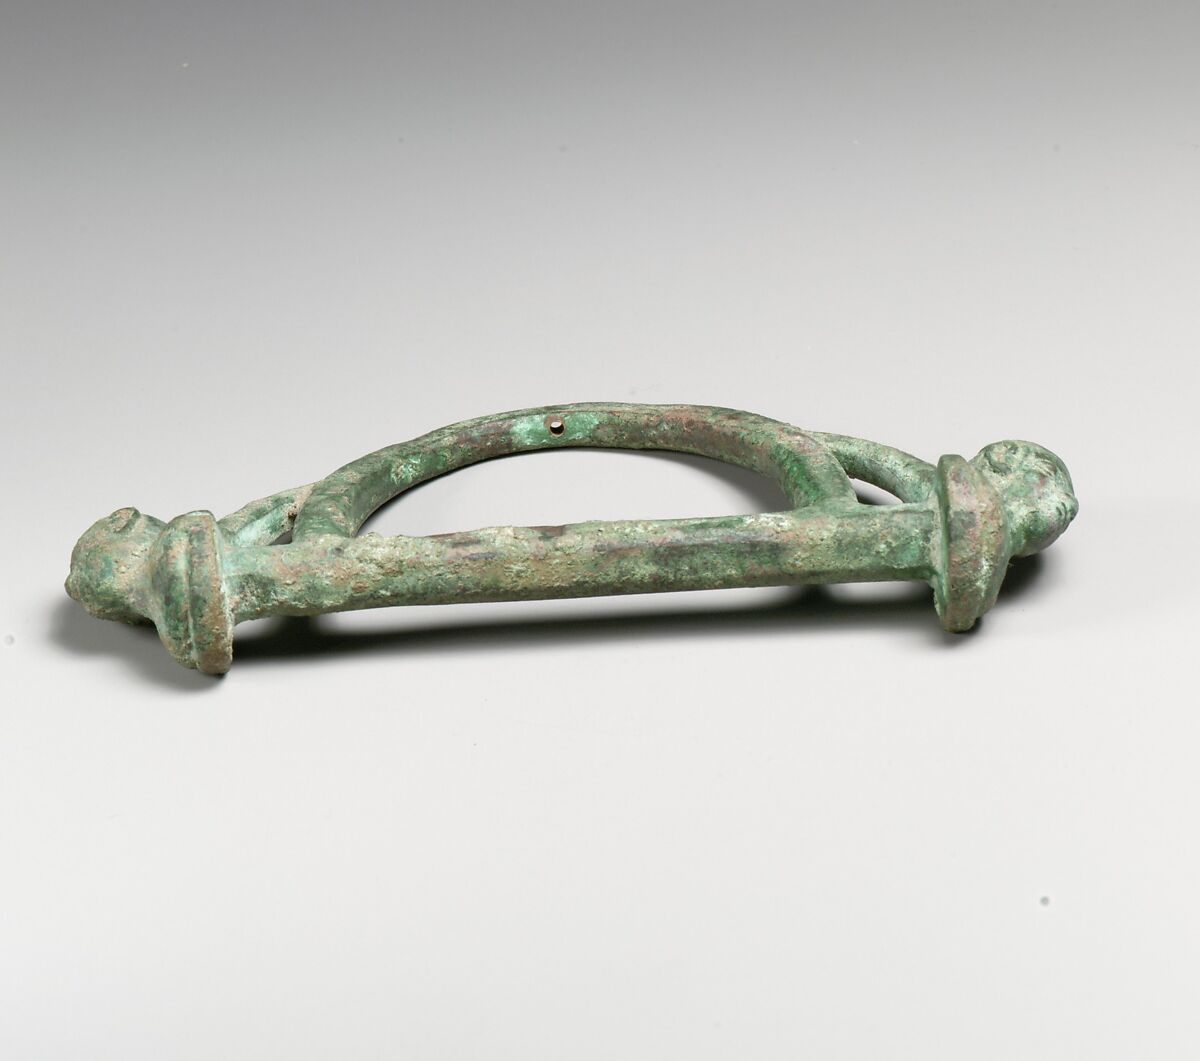 Bronze fitting, possible from a cart or chariot, Bronze, Roman 